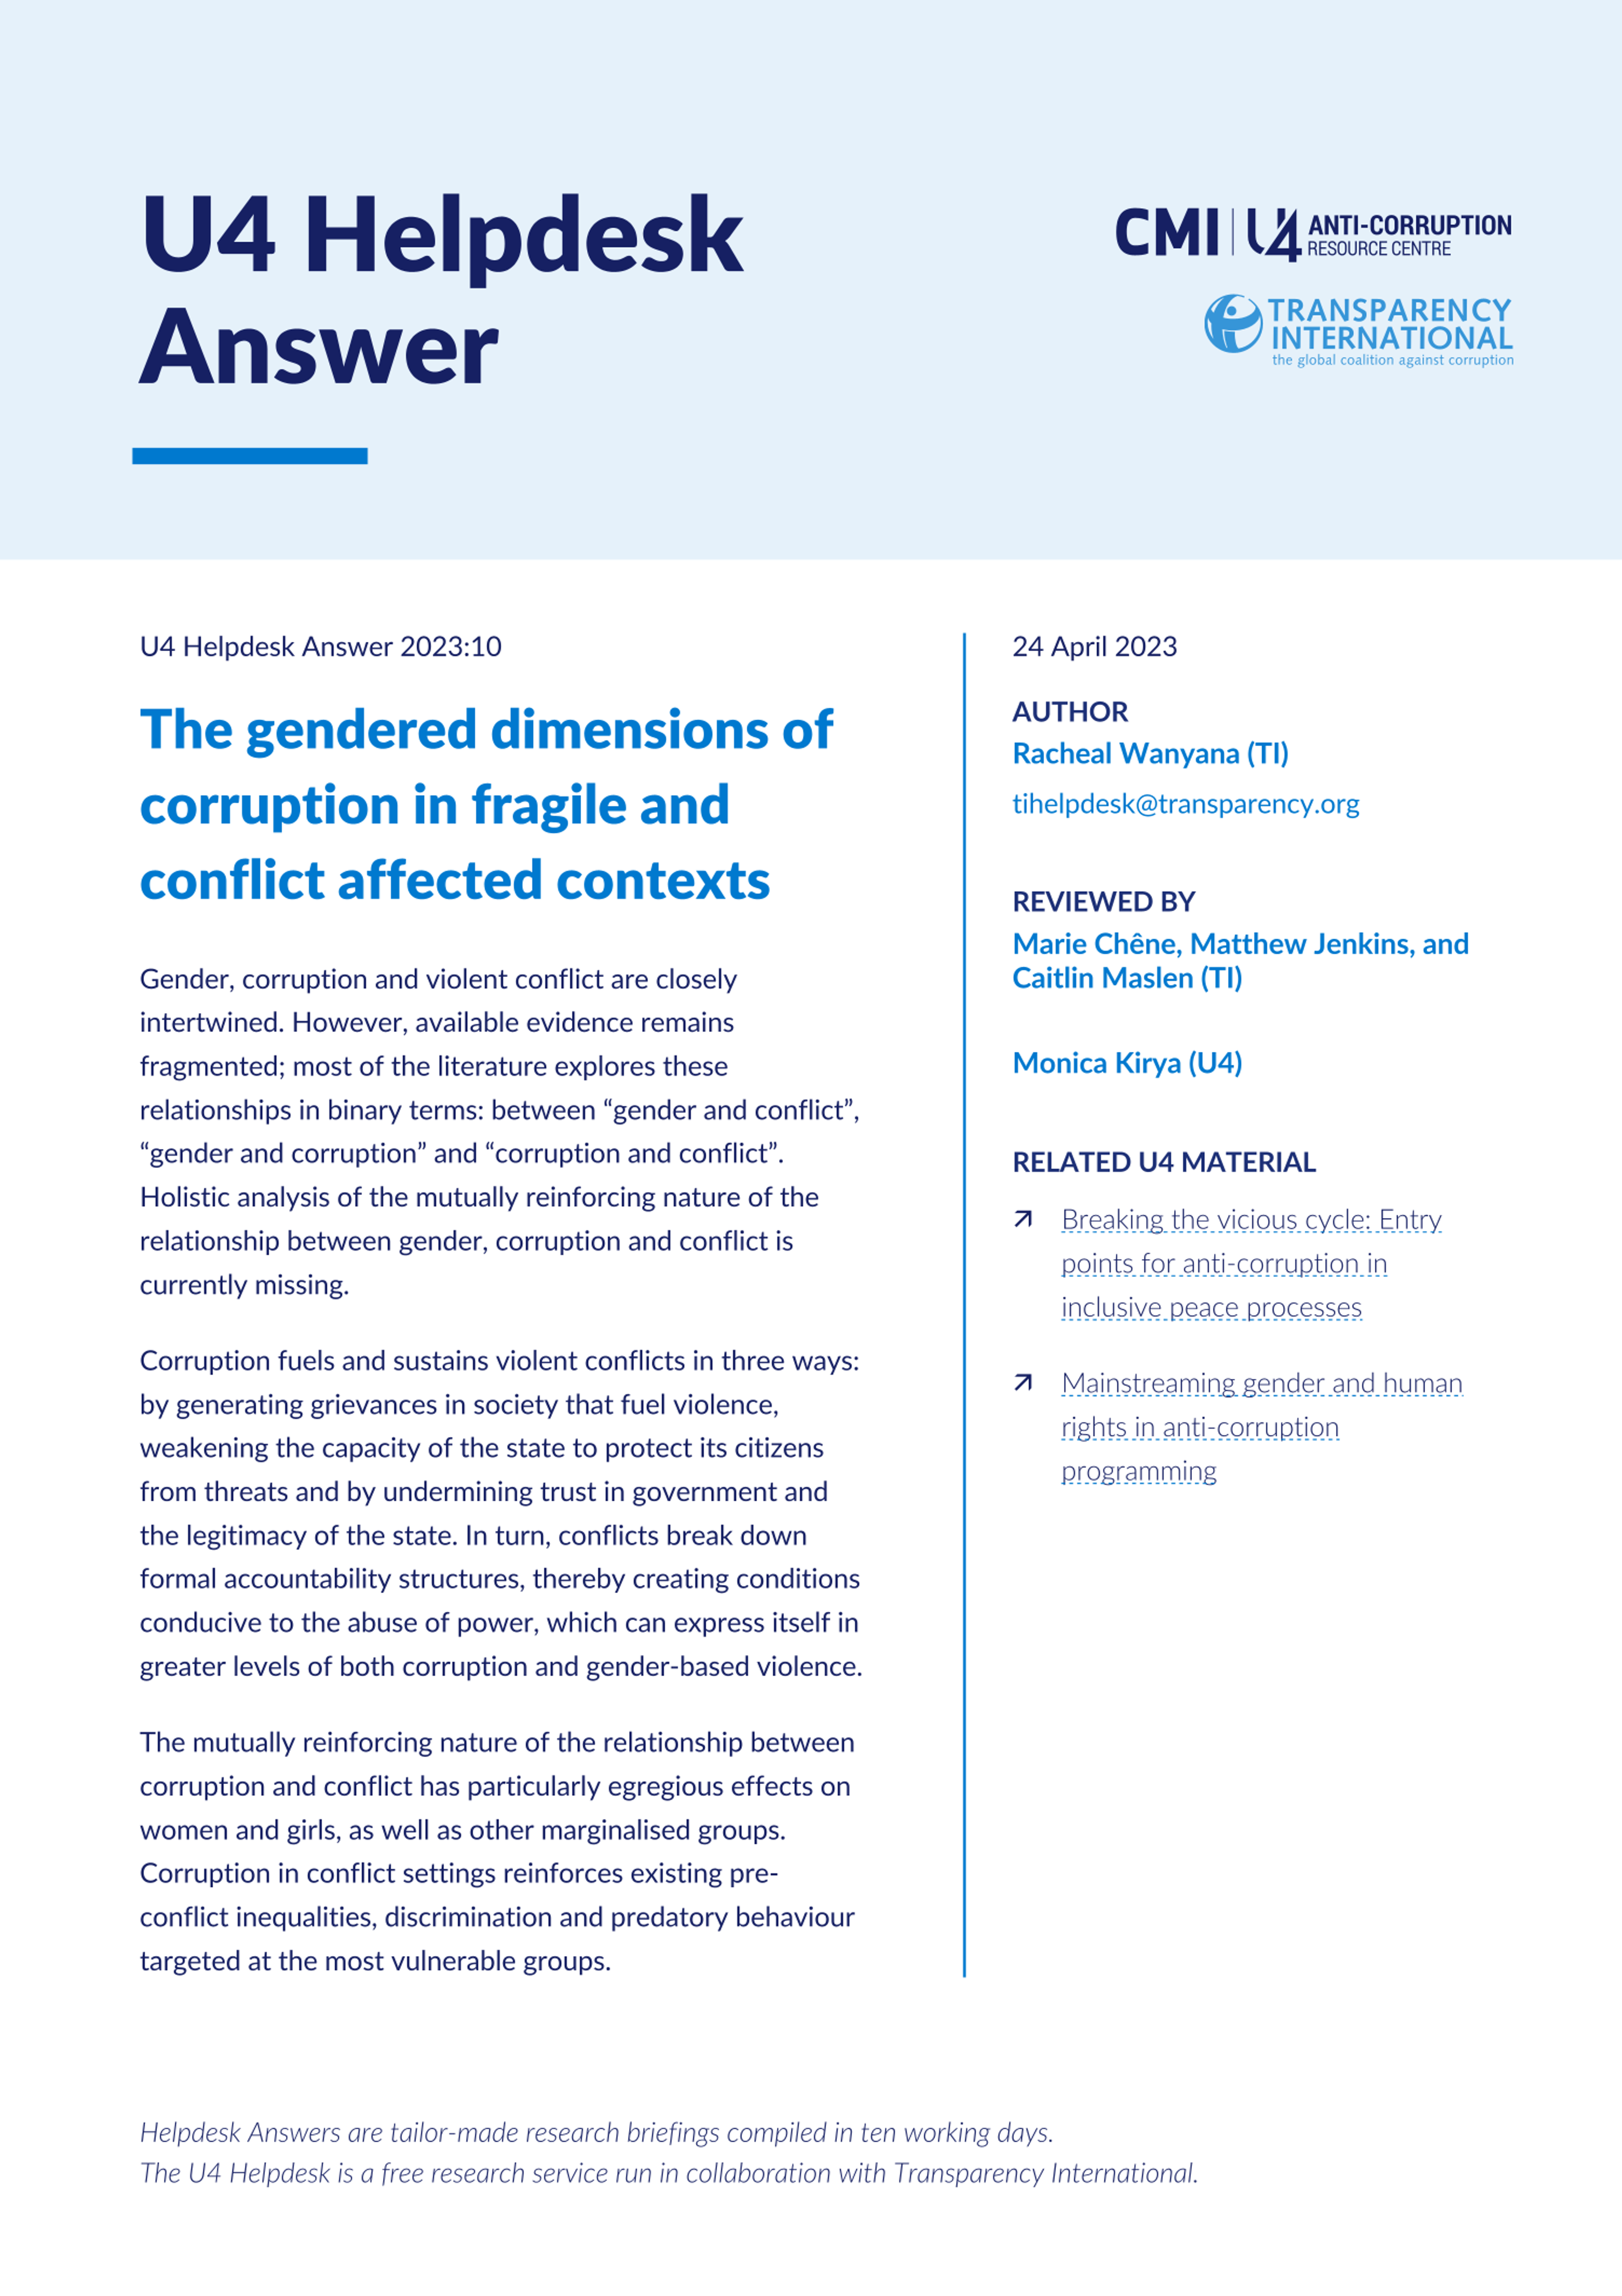 The gendered dimensions of corruption in fragile and conflict affected contexts 